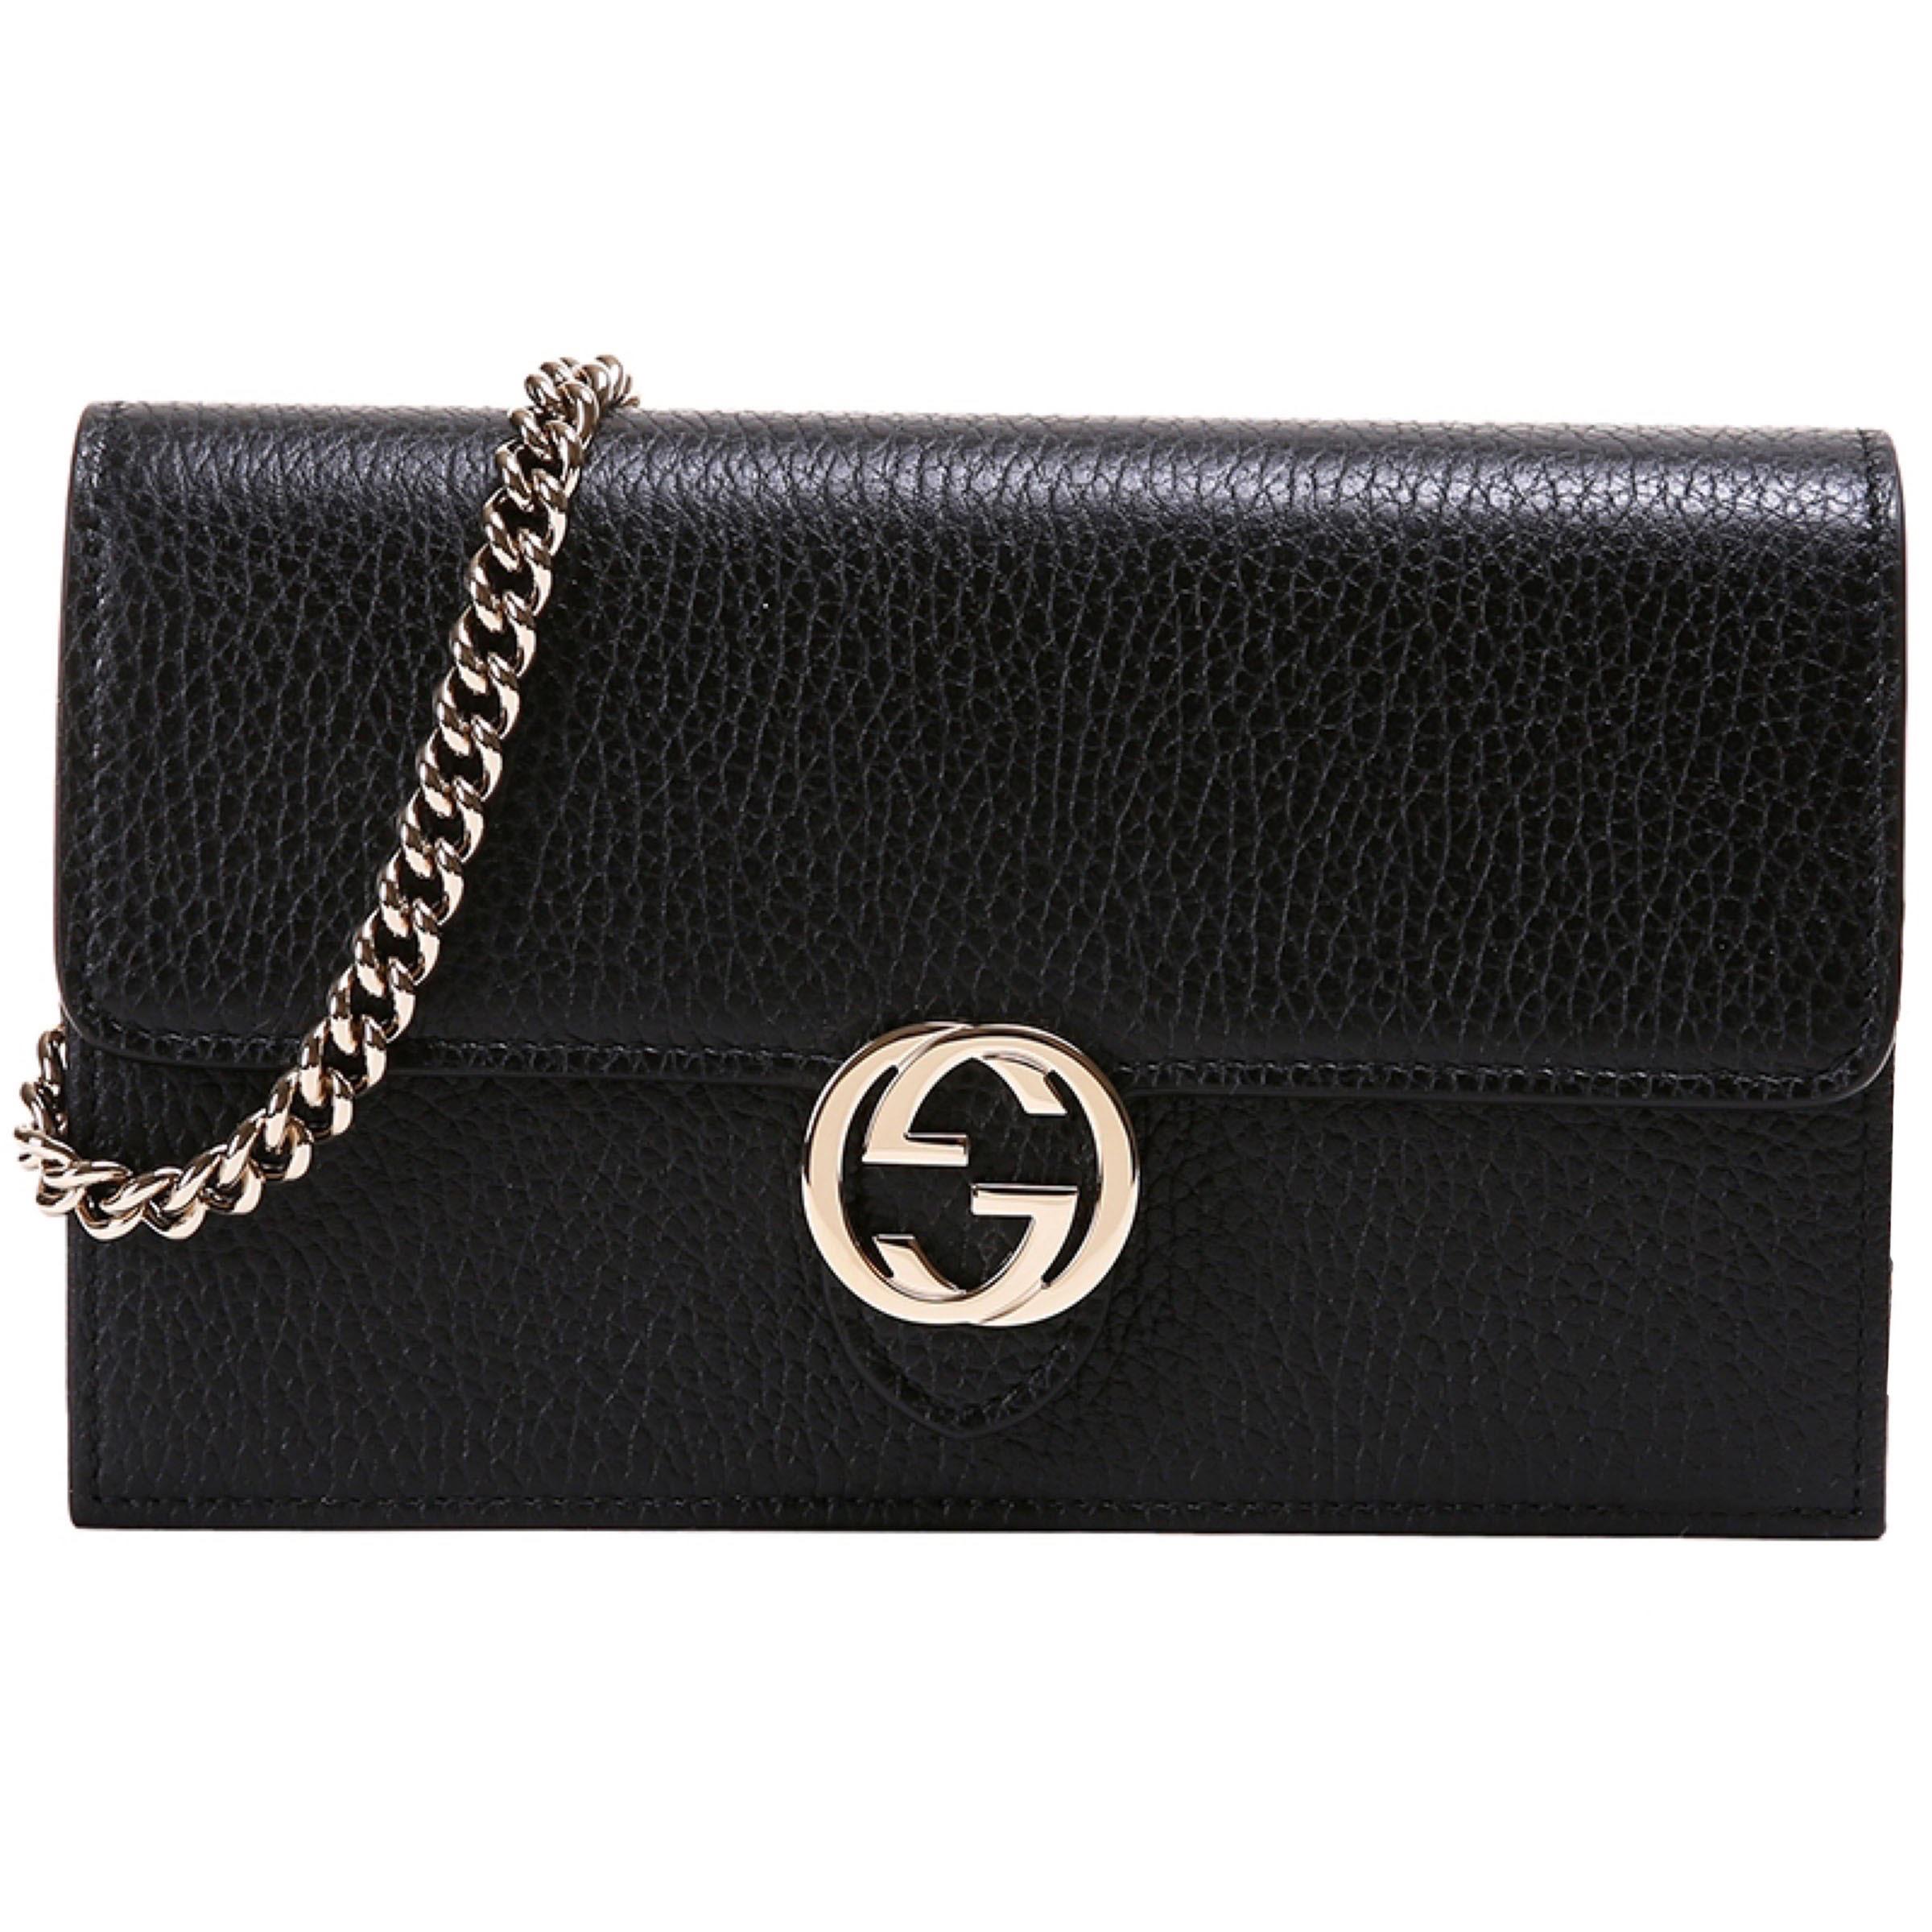 New Gucci Black Interlocking G Clutch Wallet On Chain Crossbody Shoulder Bag 

Authenticity Guaranteed

DETAILS
Brand: Gucci
Condition: Brand new
Color: Black
Material: Leather
Interlocking G logo
Snap button flap closure
Zip coin compartment
Light